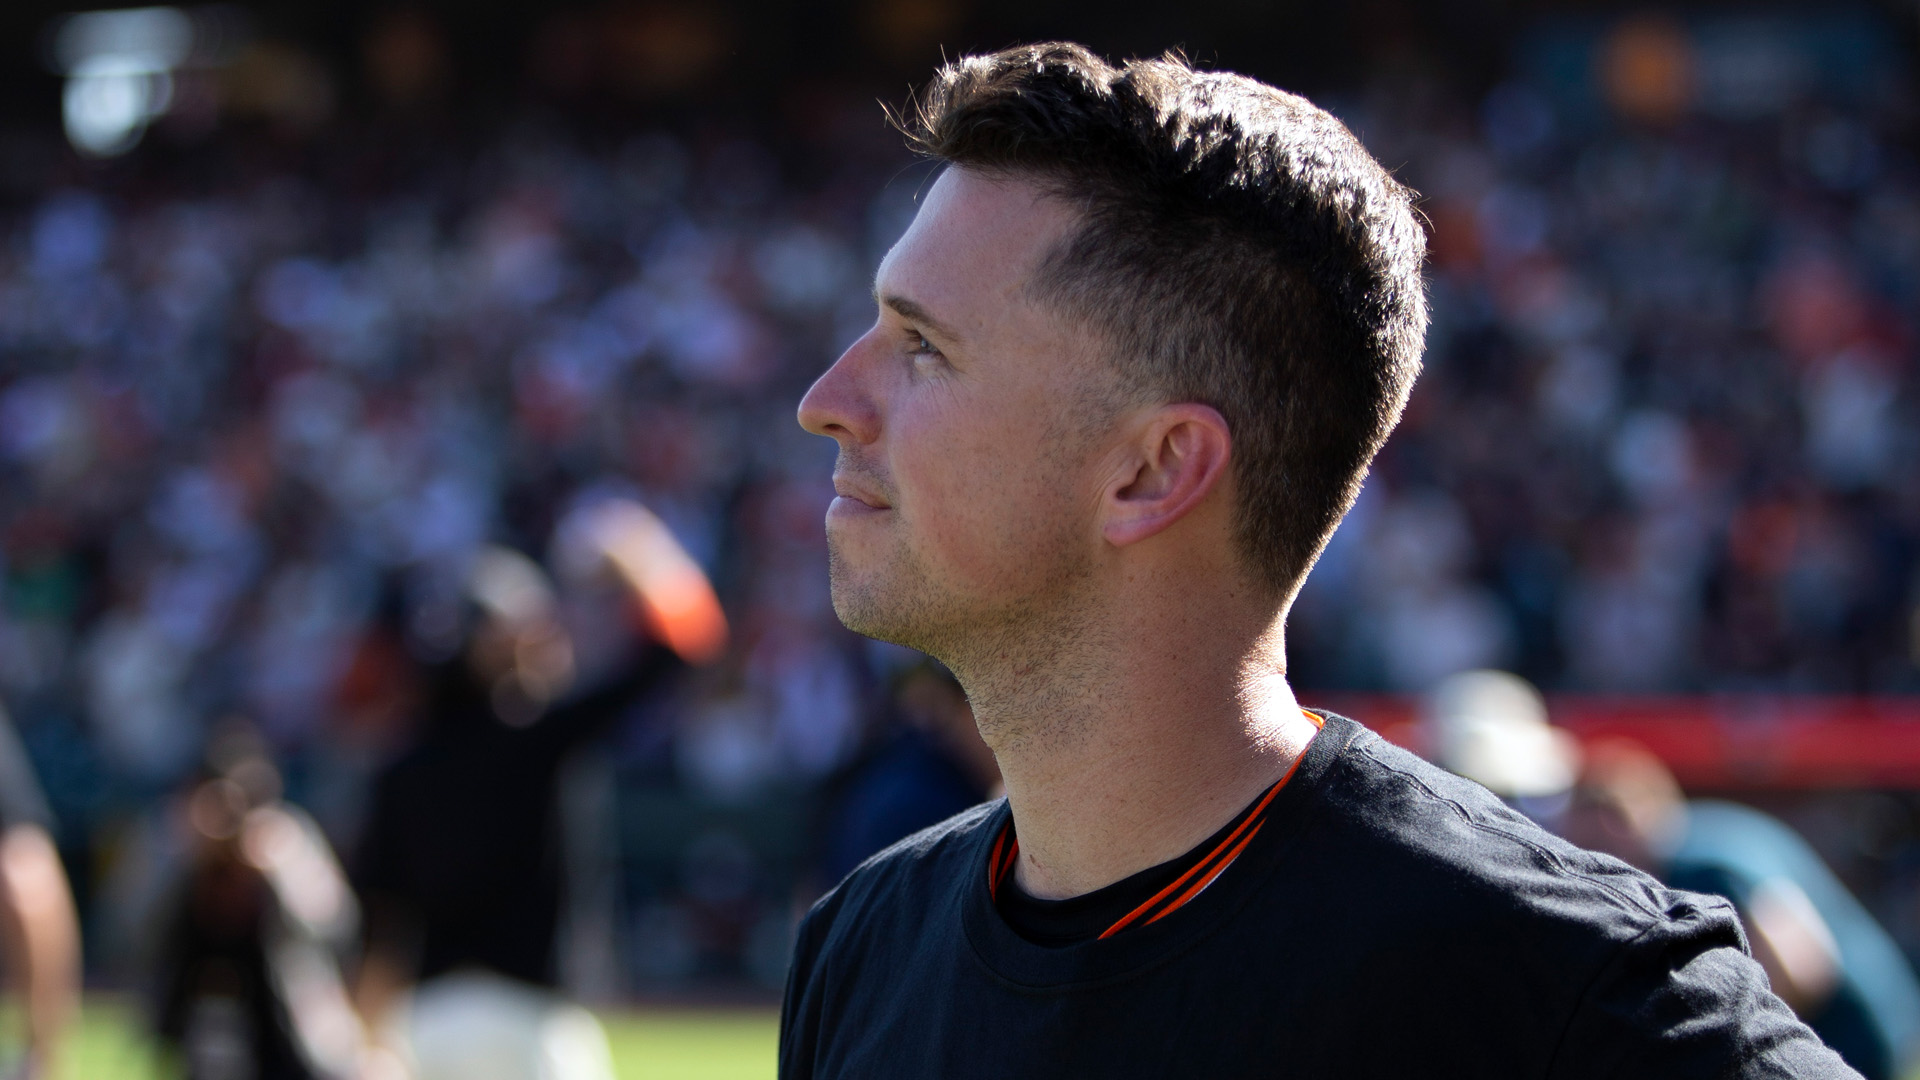 MLB world reacts to shocking Buster Posey retirement news